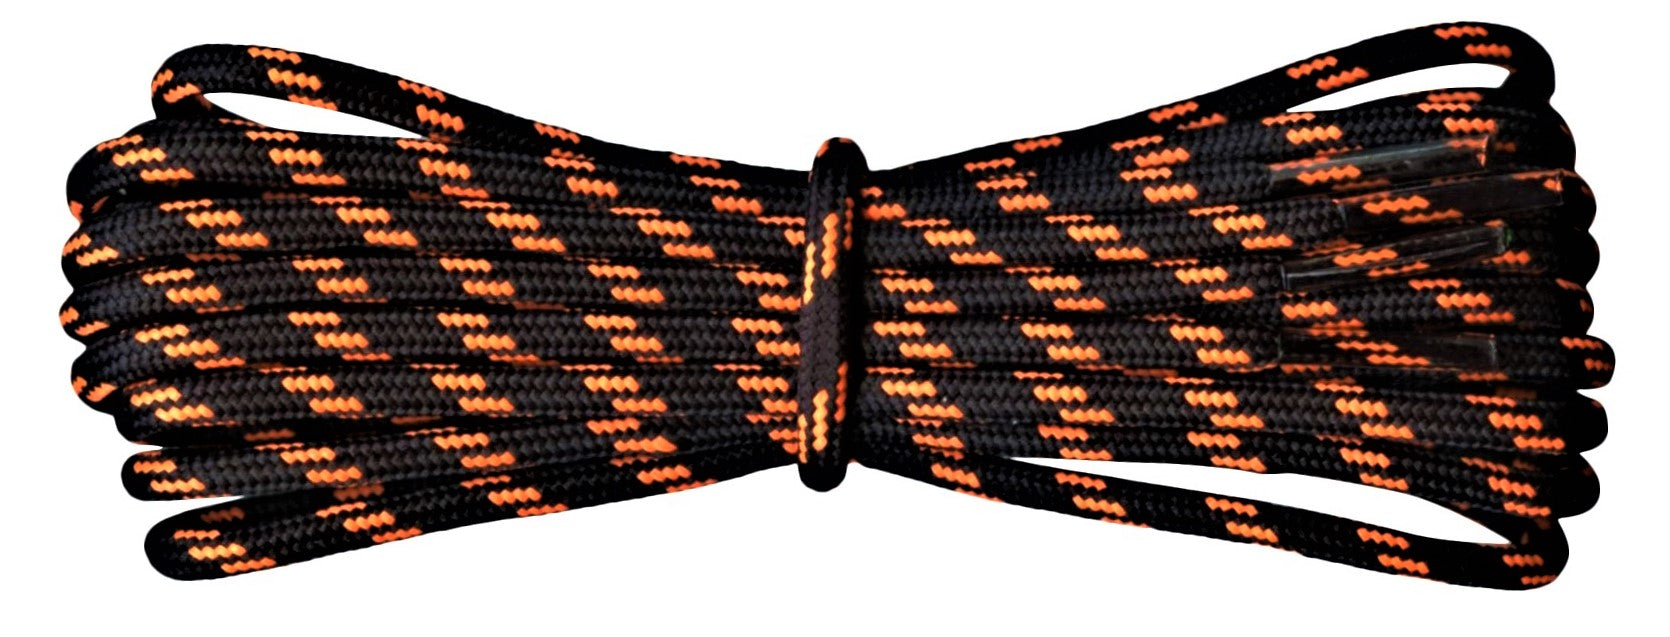 Strong Round Boot Laces Black with neon Orange flecks for hiking or walking  3.5 mm - fabmania shoe laces